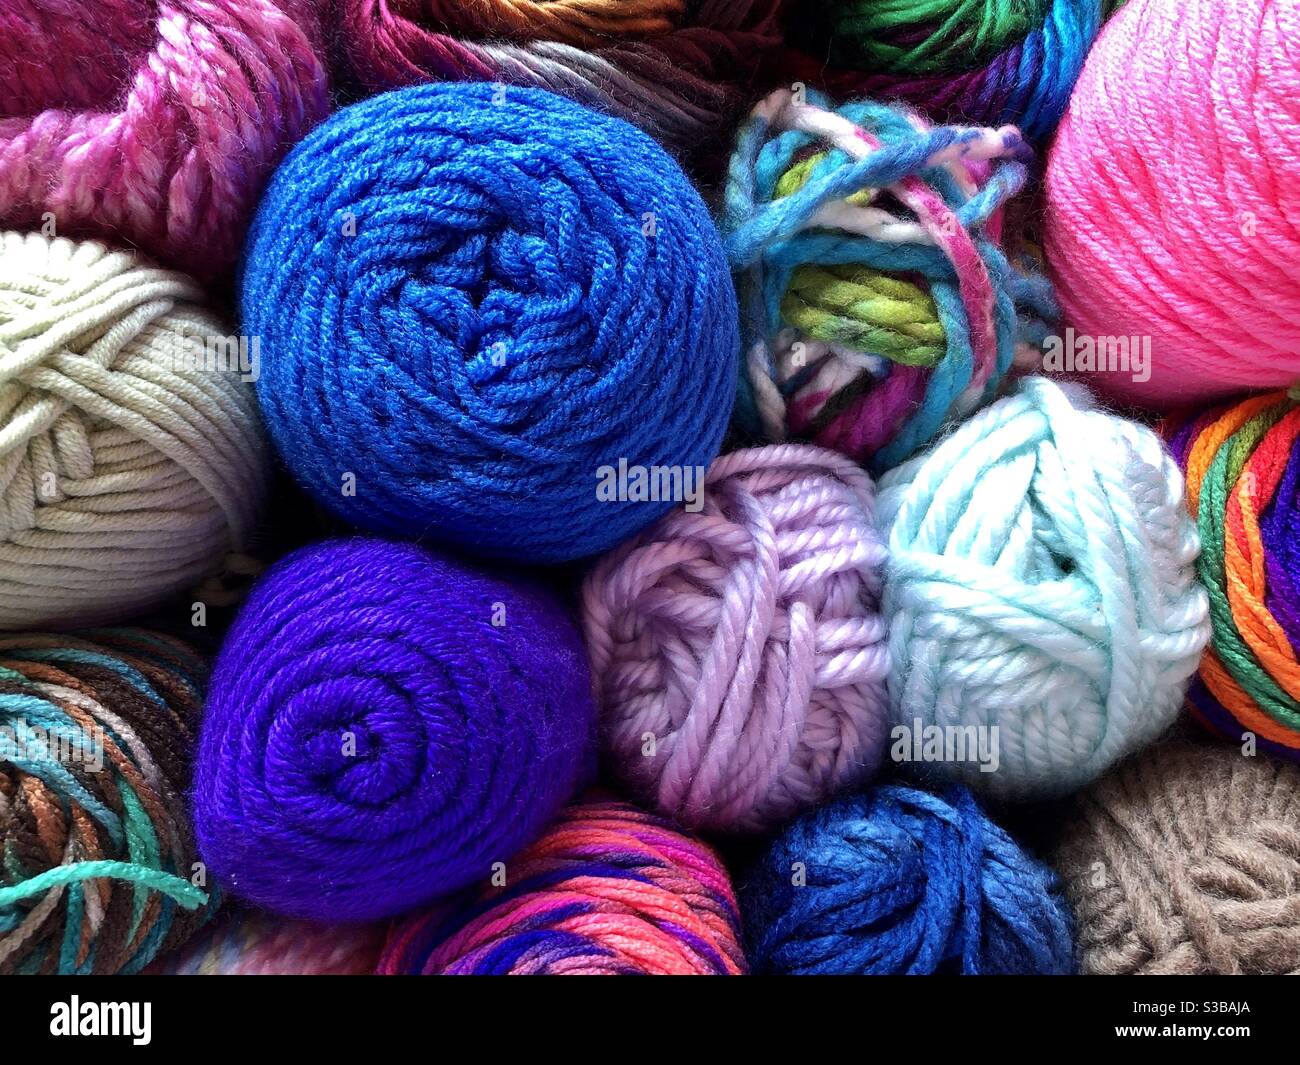 Full frame of assorted colorful yarns Stock Photo